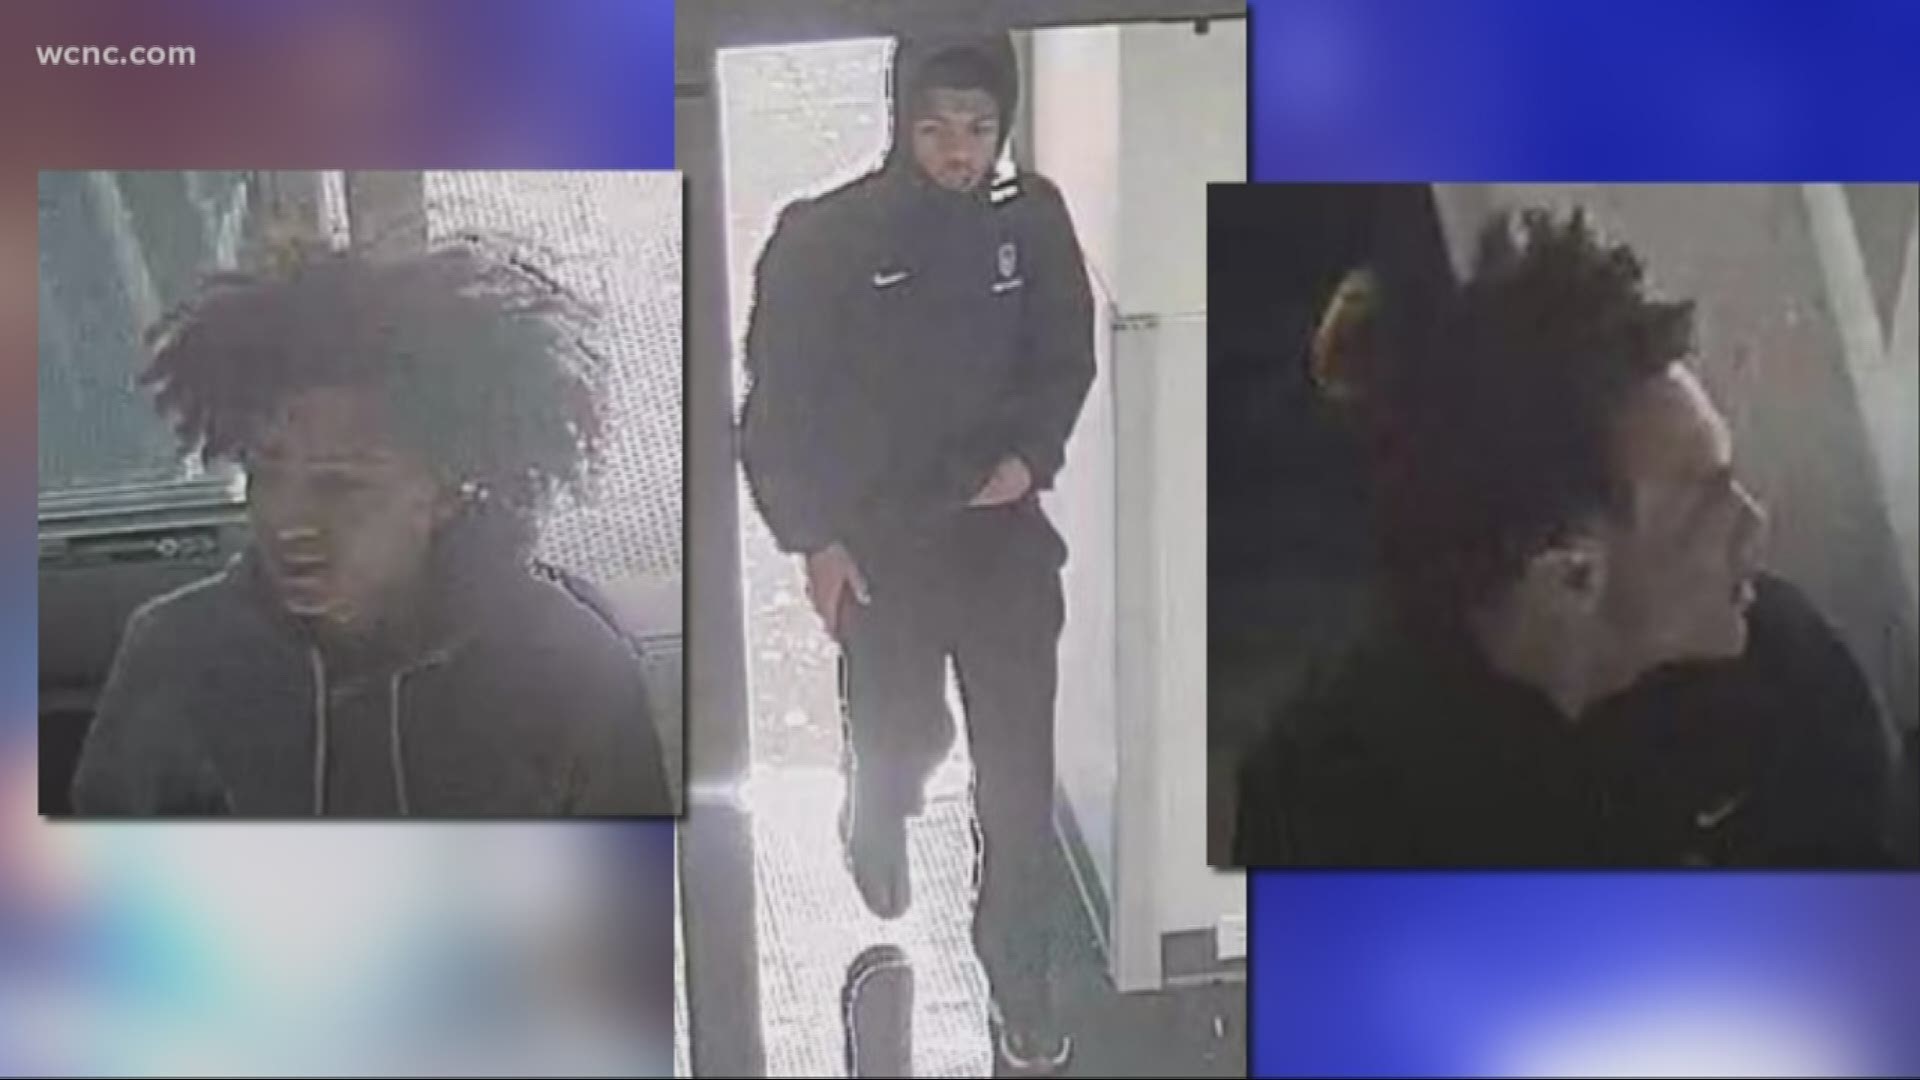 Concord Police are looking for three suspects accused of robbing someone at gunpoint at Concord Mills mall.